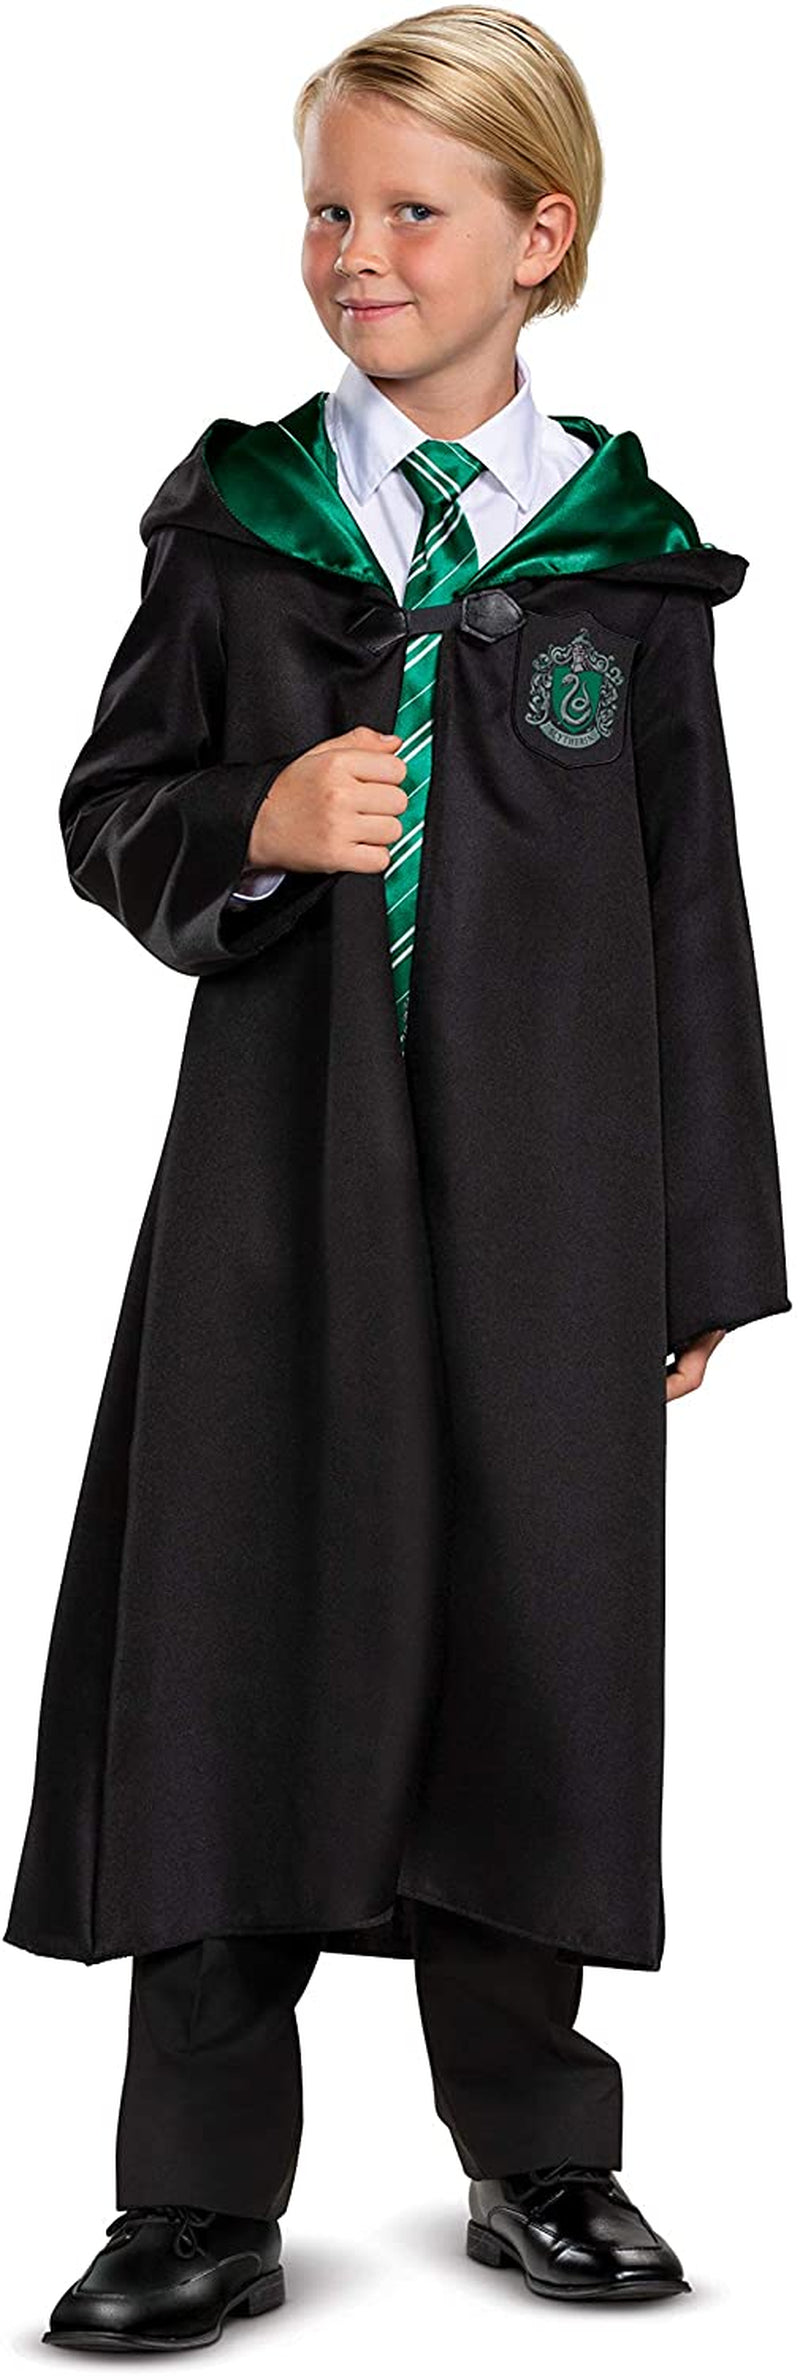 Harry Potter Robe, Official Hogwarts Wizarding World Costume Robes, Classic Kids Size Dress up Accessory  Disguise Slytherin Medium (7-8) 